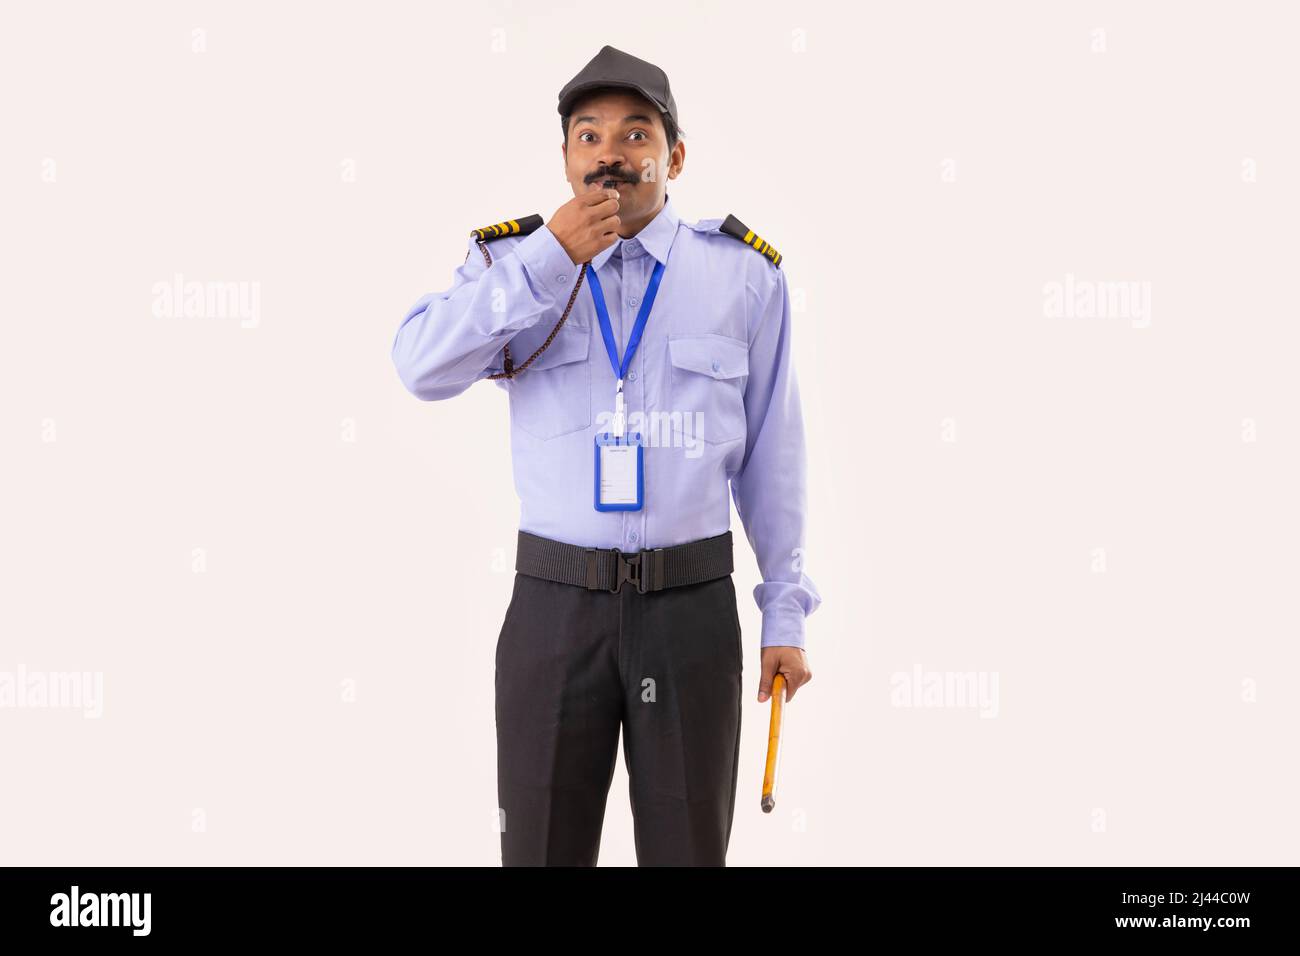 Portrait of Security guard blowing whistle Stock Photo